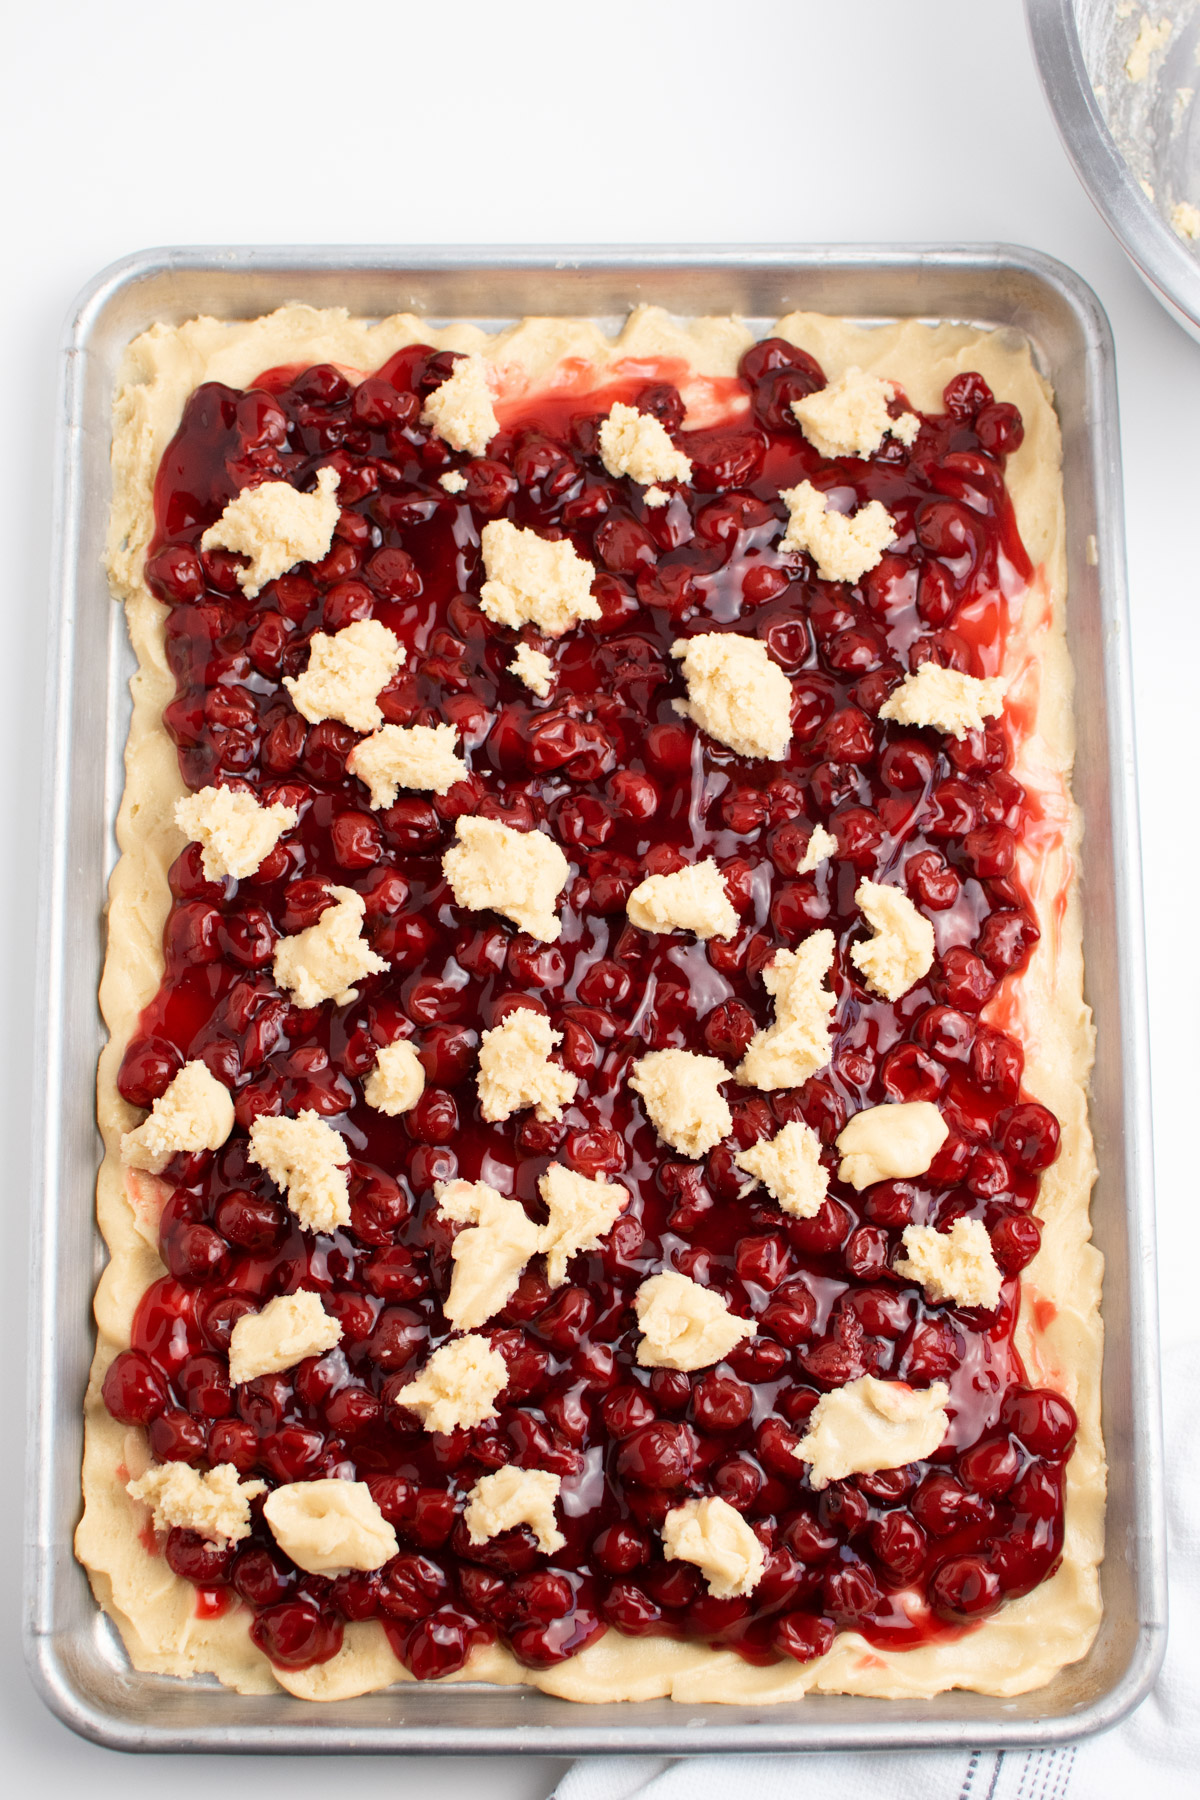 Dotted batter on cherry bars over crust on large metal making sheet.